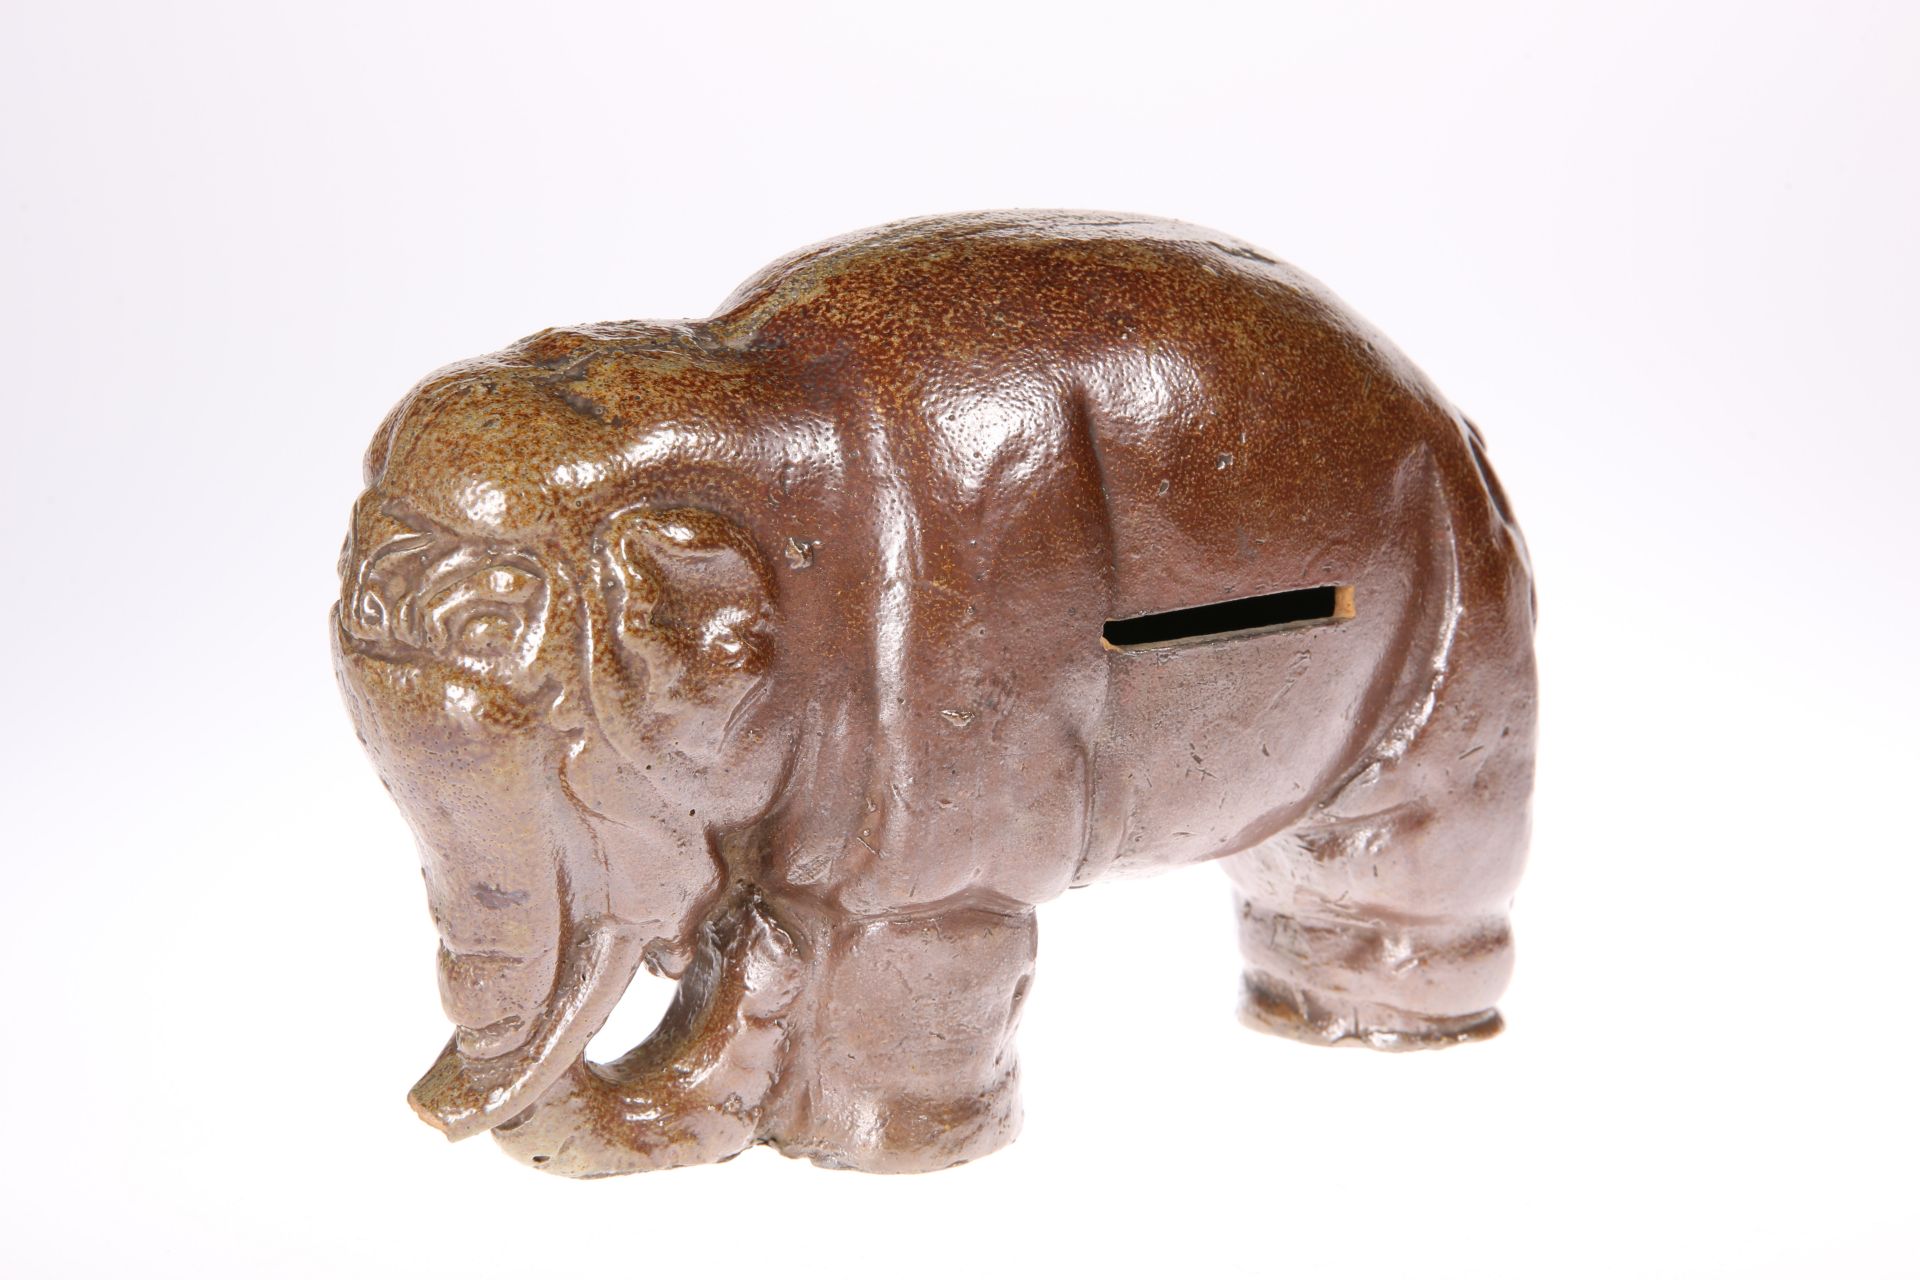 A JAPANESE POTTERY NOVELTY MONEYBOX, MEIJI PERIOD, in the form of an elephant. 15cm high